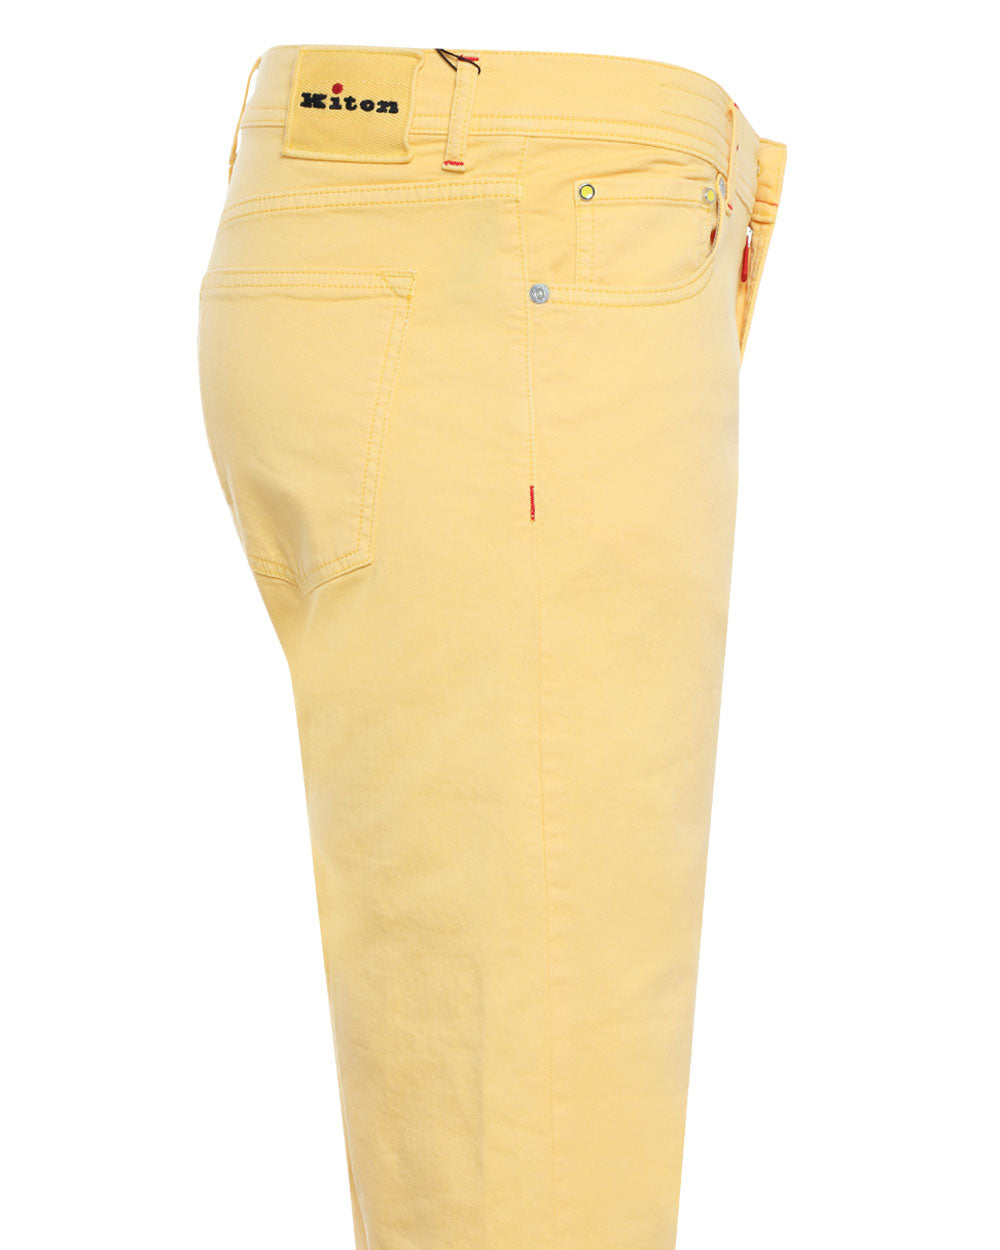 Washed Yellow Cotton Blend Slim Fit Chino Pant